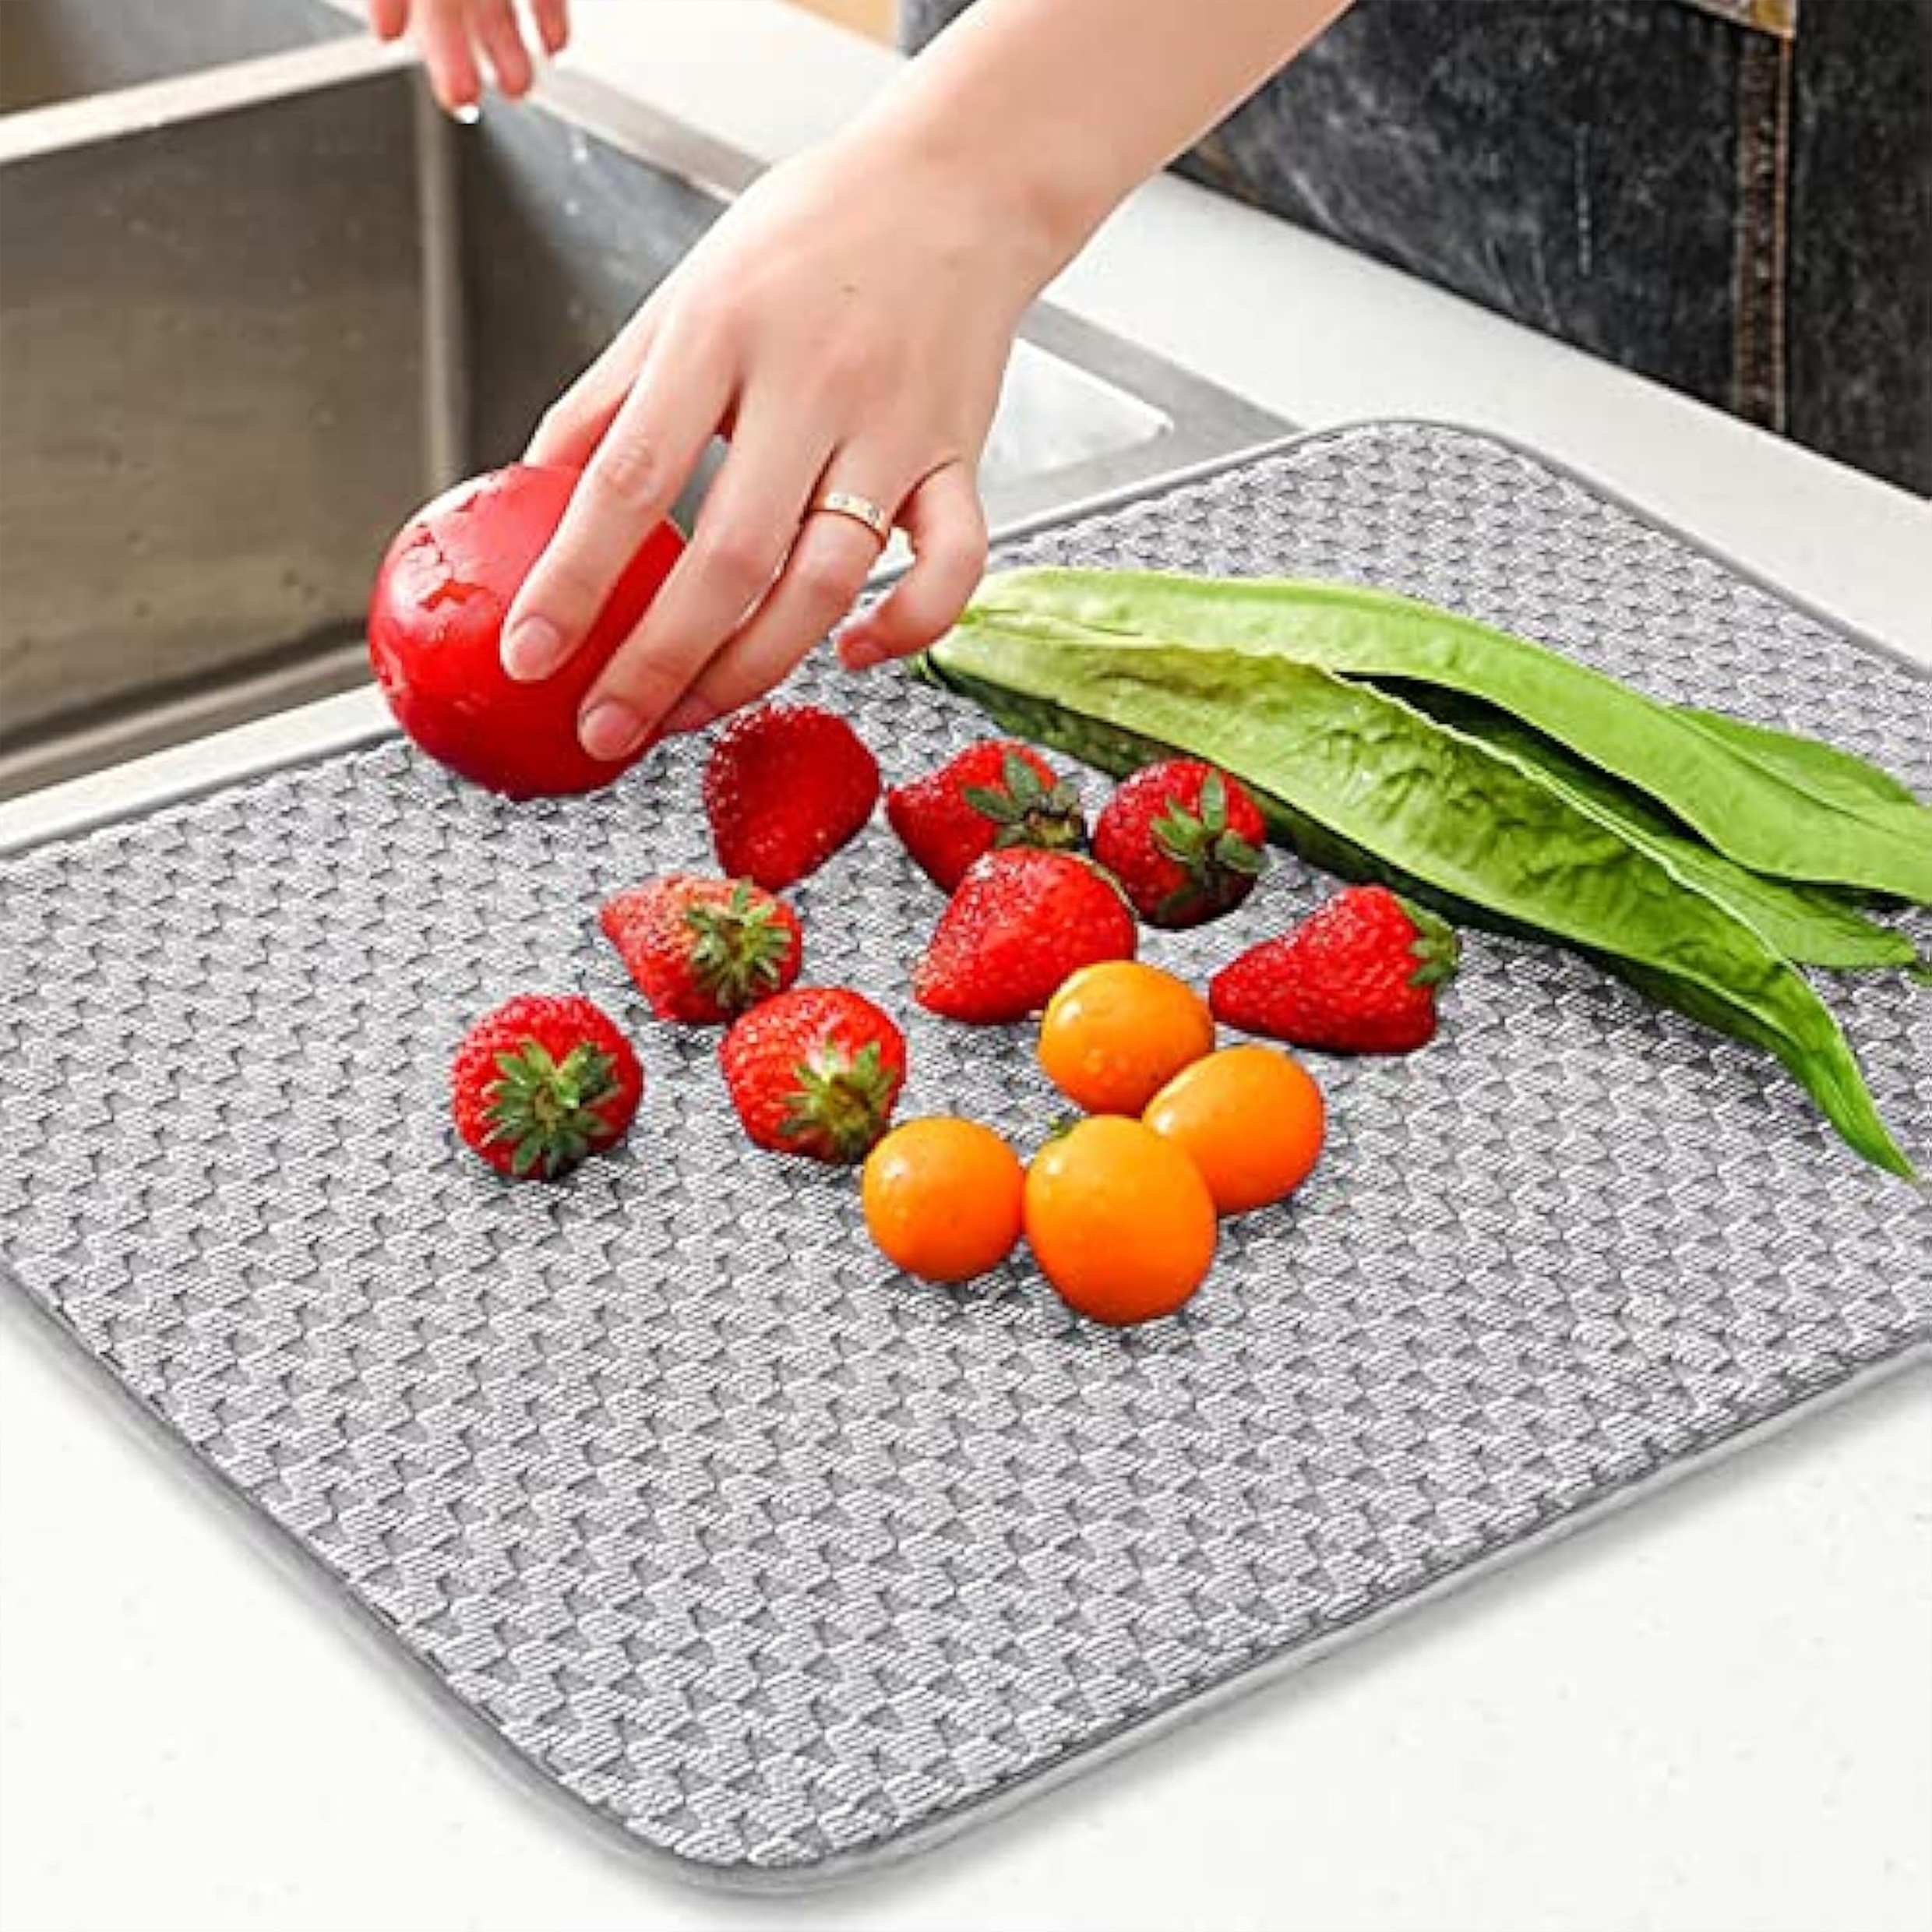 DK177 Dish Drying Mat for Kitchen Counter, Super Absorbent Dish